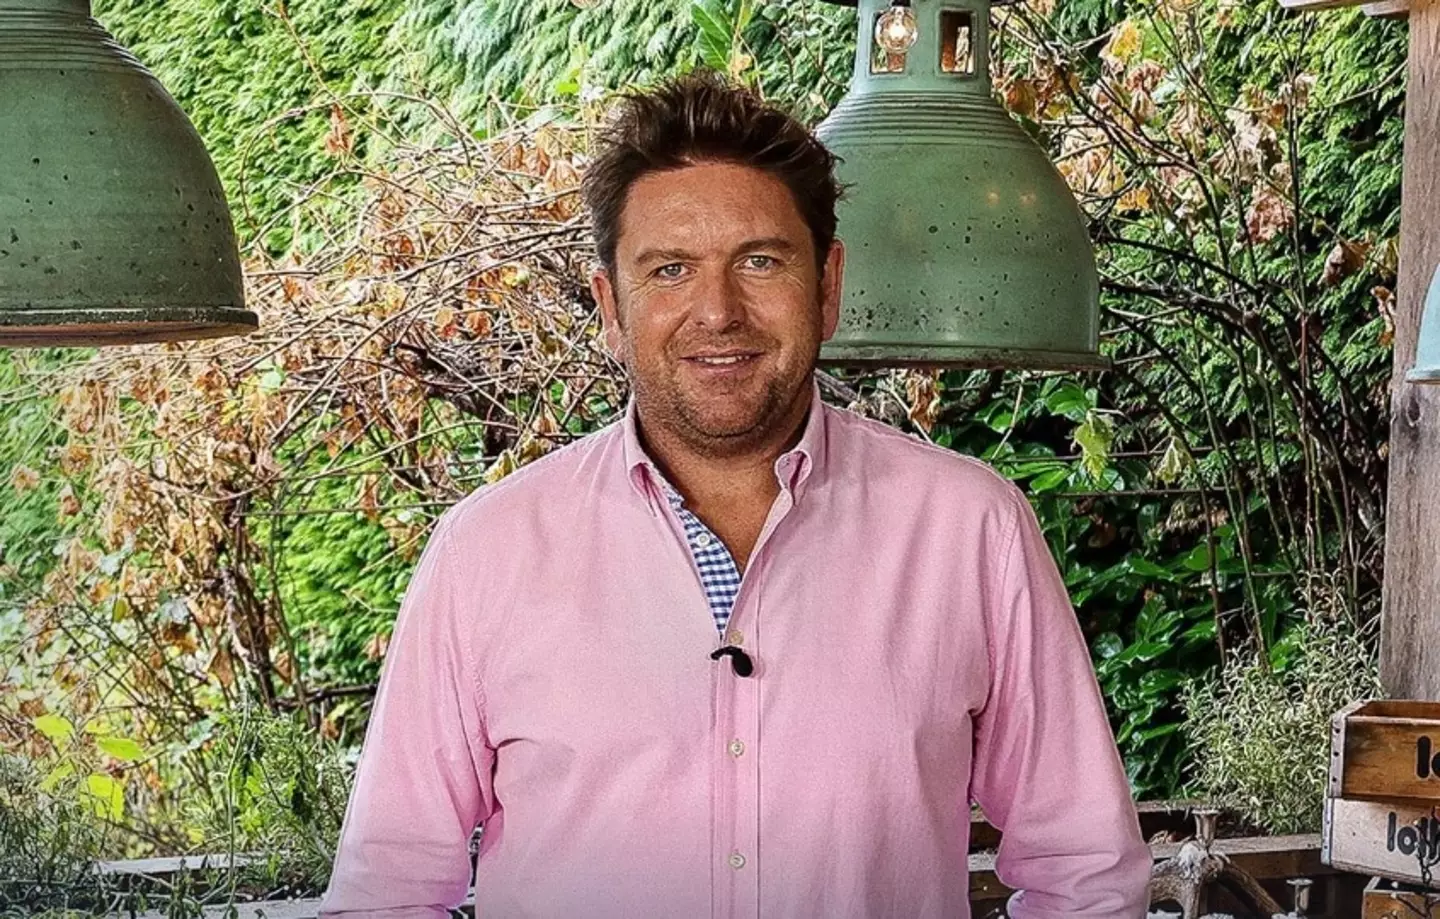 James Martin has been with ITV since 2017, and before that he was with the BBC.